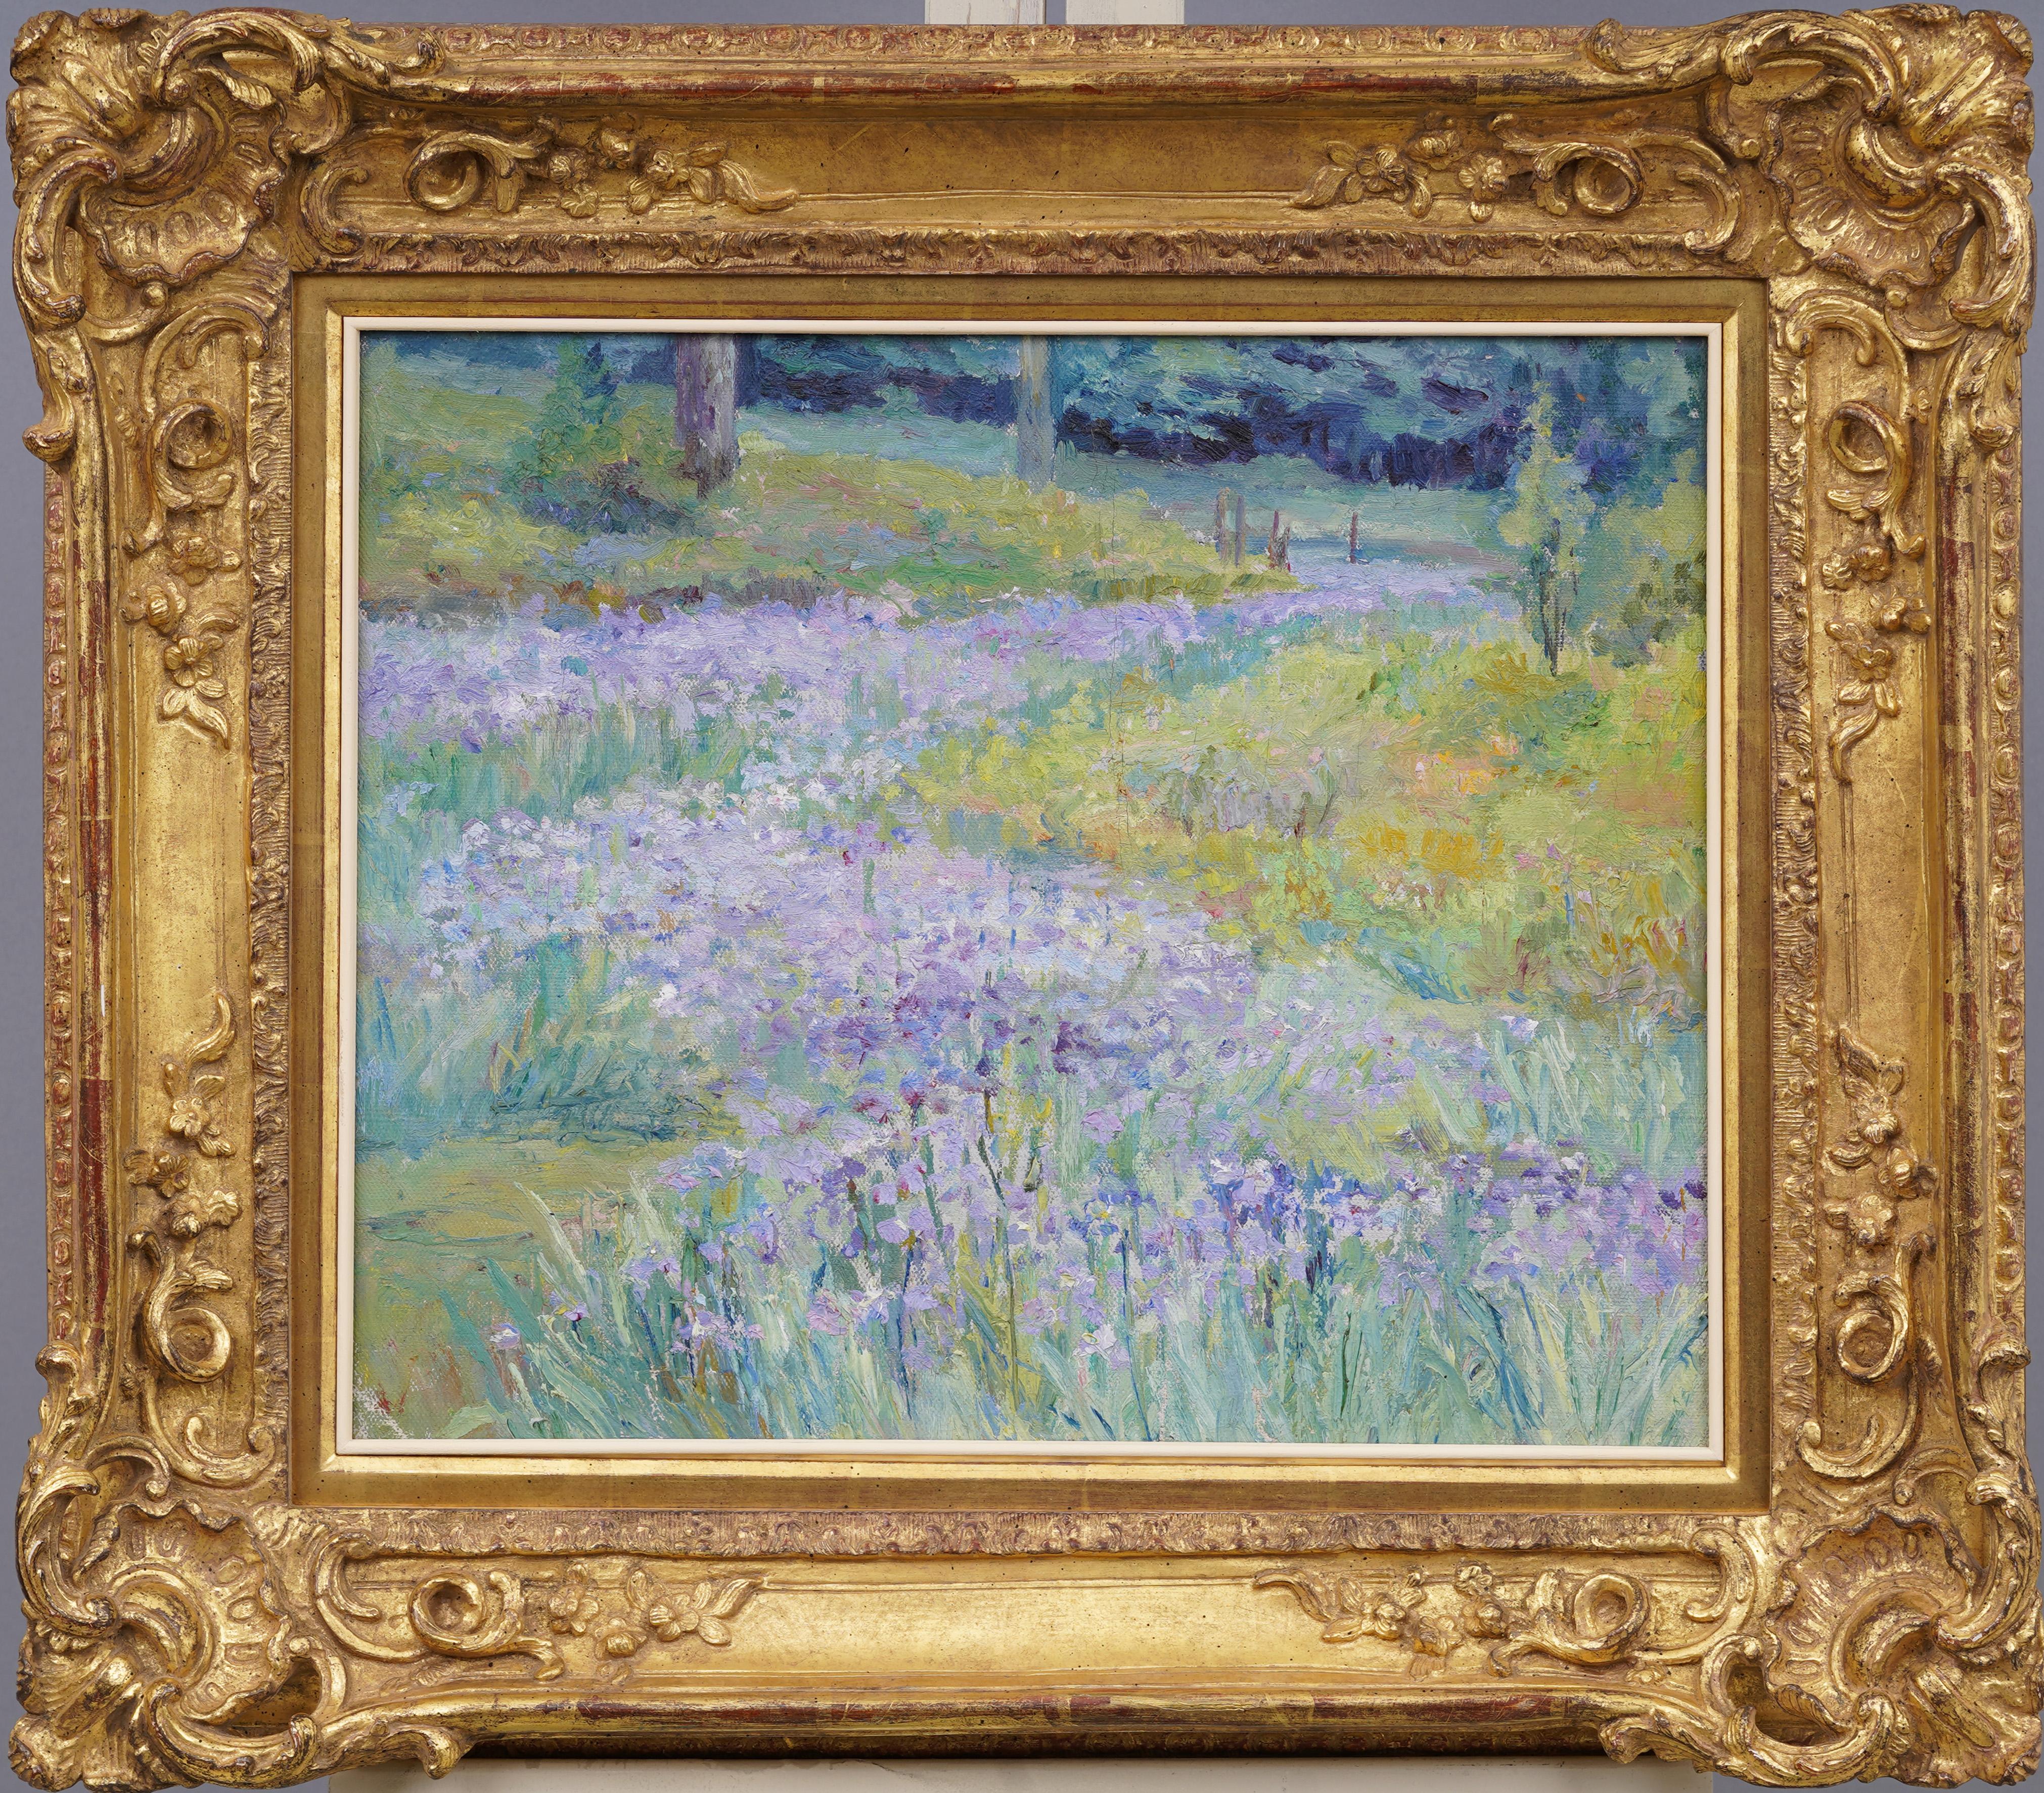 Antique American impressionist flower landscape oil painting by Mary Aubin Harris (Born 1864) .  Oil on canvas.  Framed.  Image size, 14H x 17L.  Harris was a student of William Merrit Chase and is very rare to come by.  Really nicely framed and a